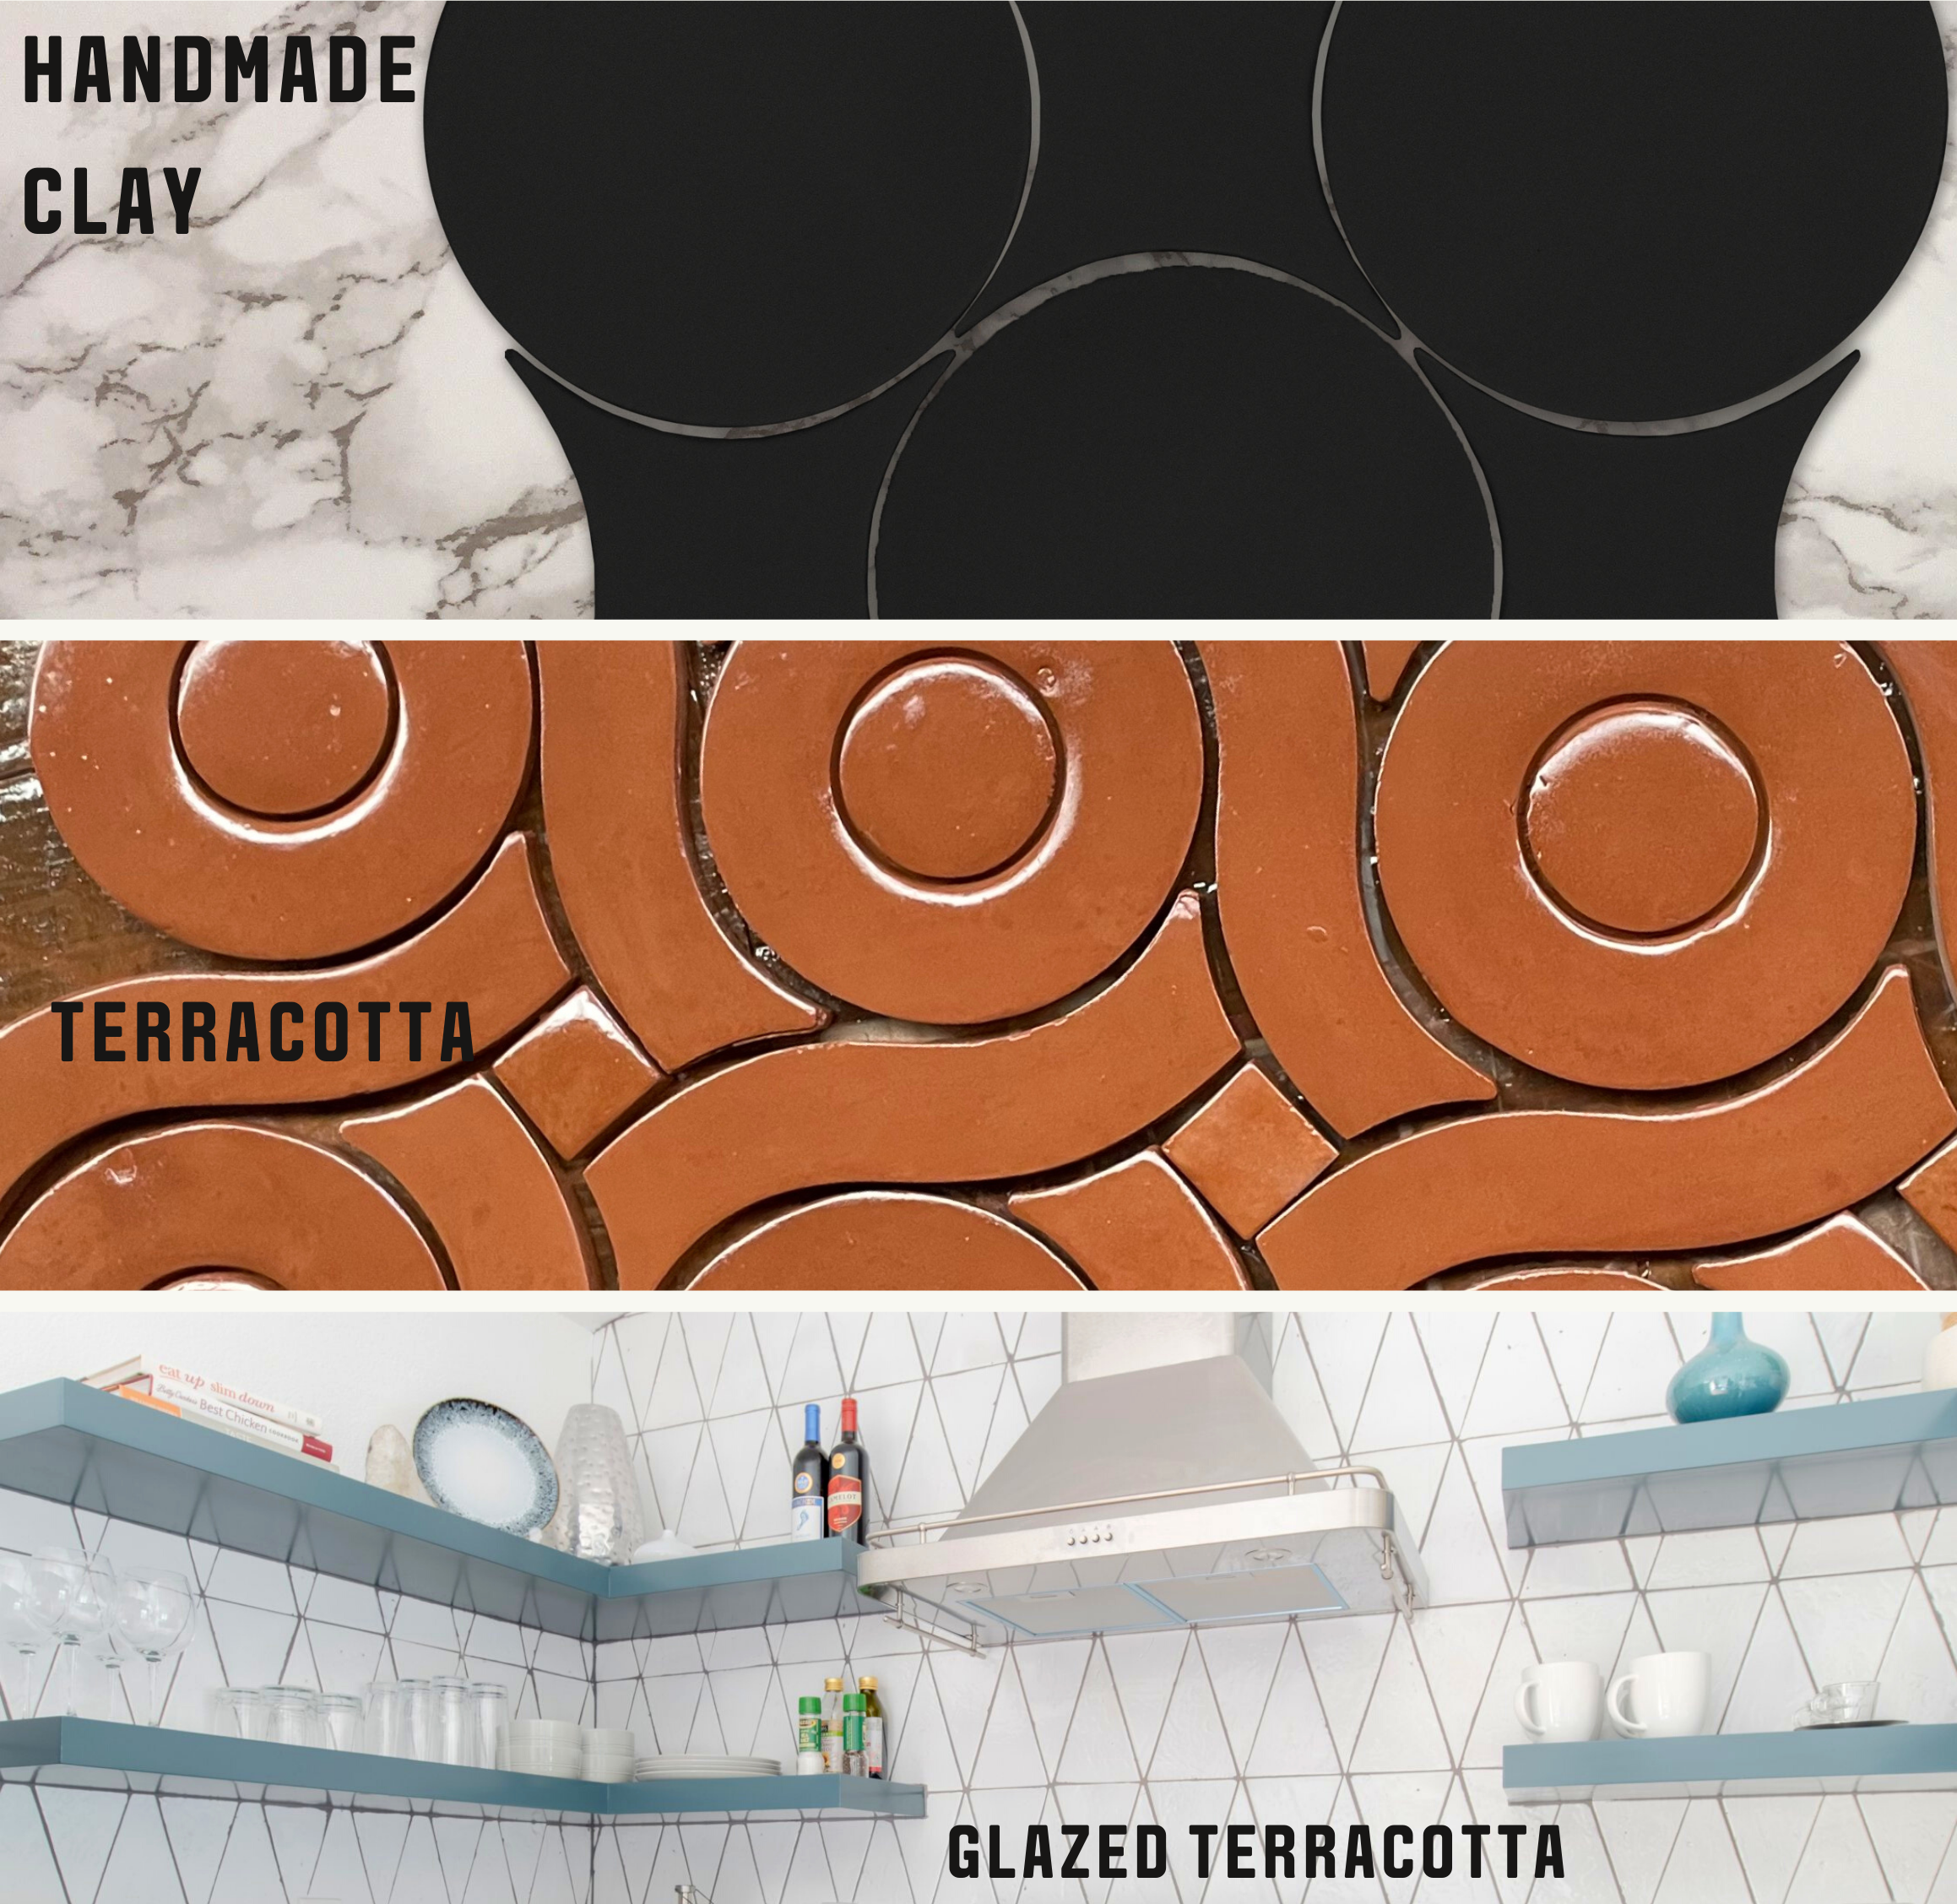 Images of tile shapes available for customization with clay imports